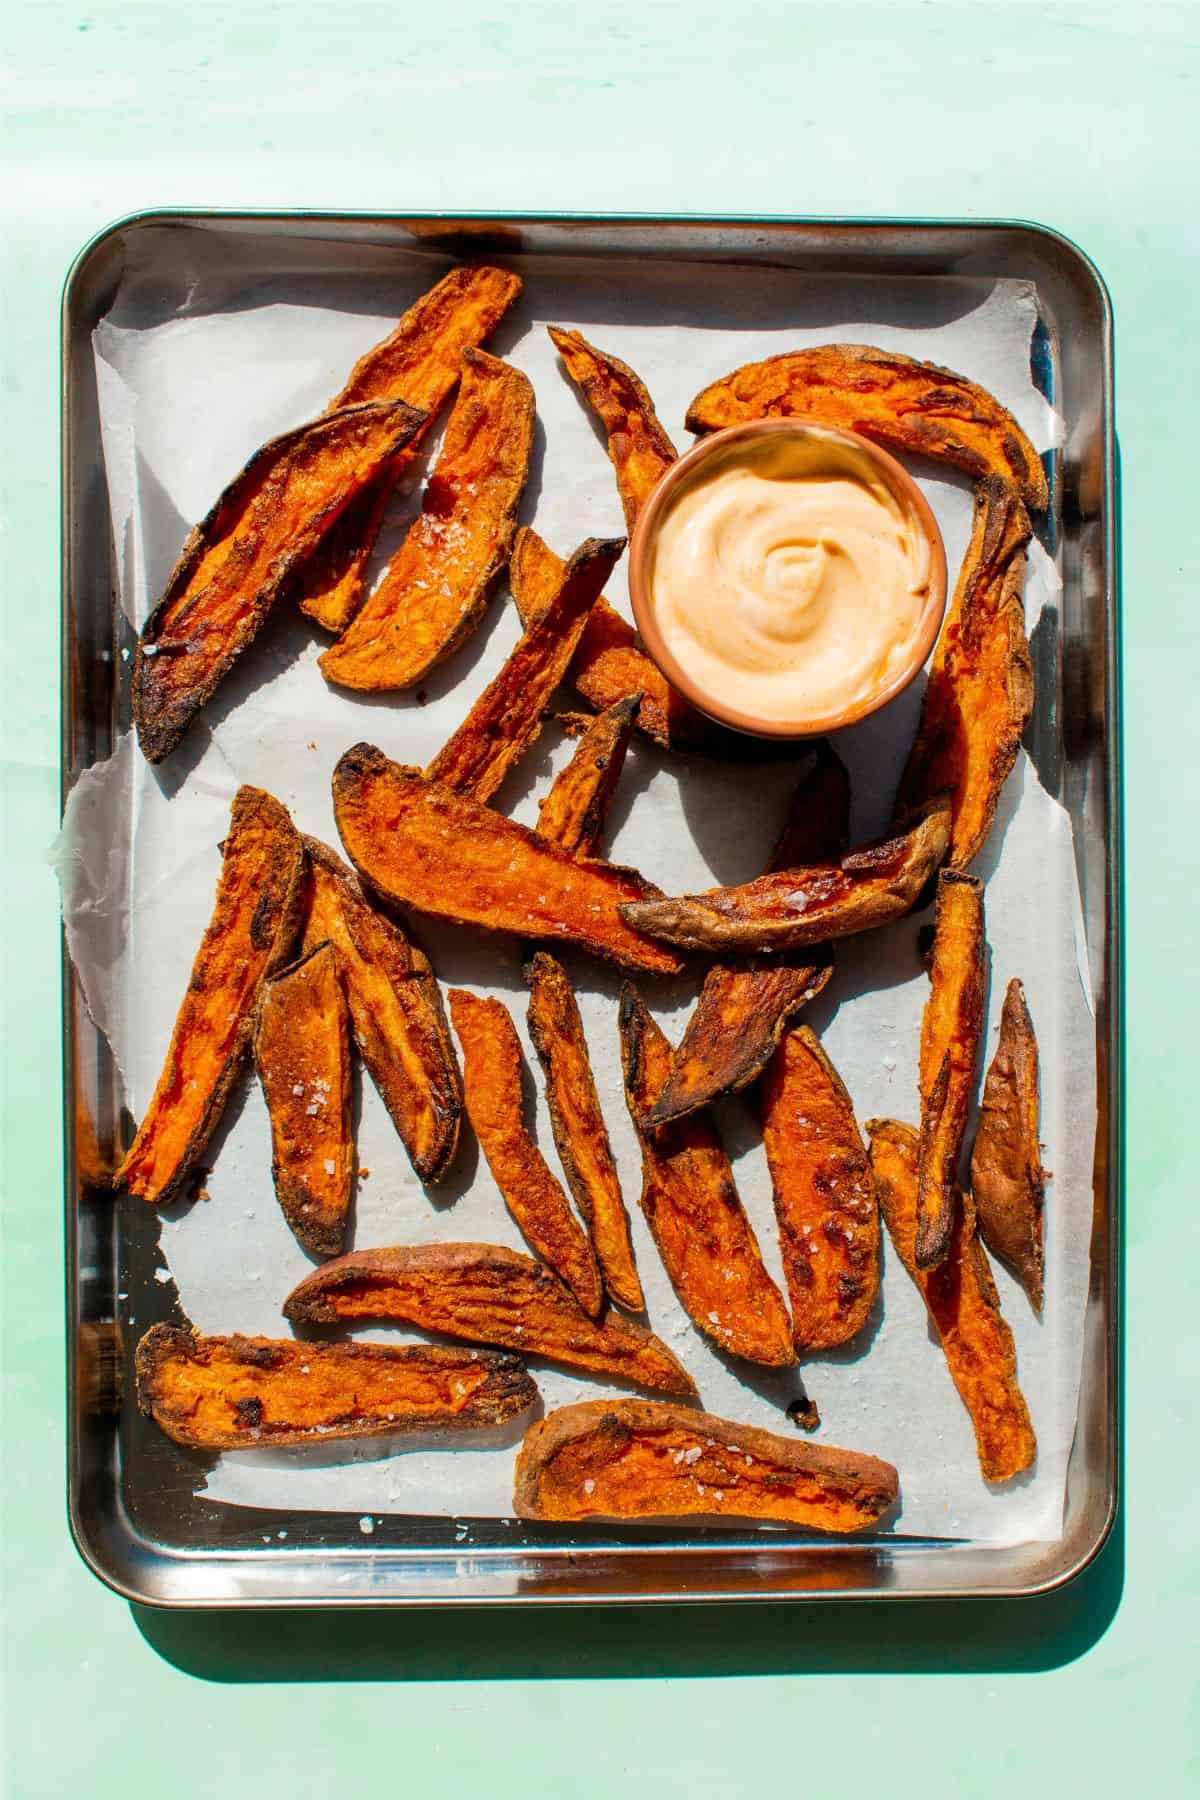 Crispy sweet potatoes laid out on parchment paper on a baking tray with dipping sauce.